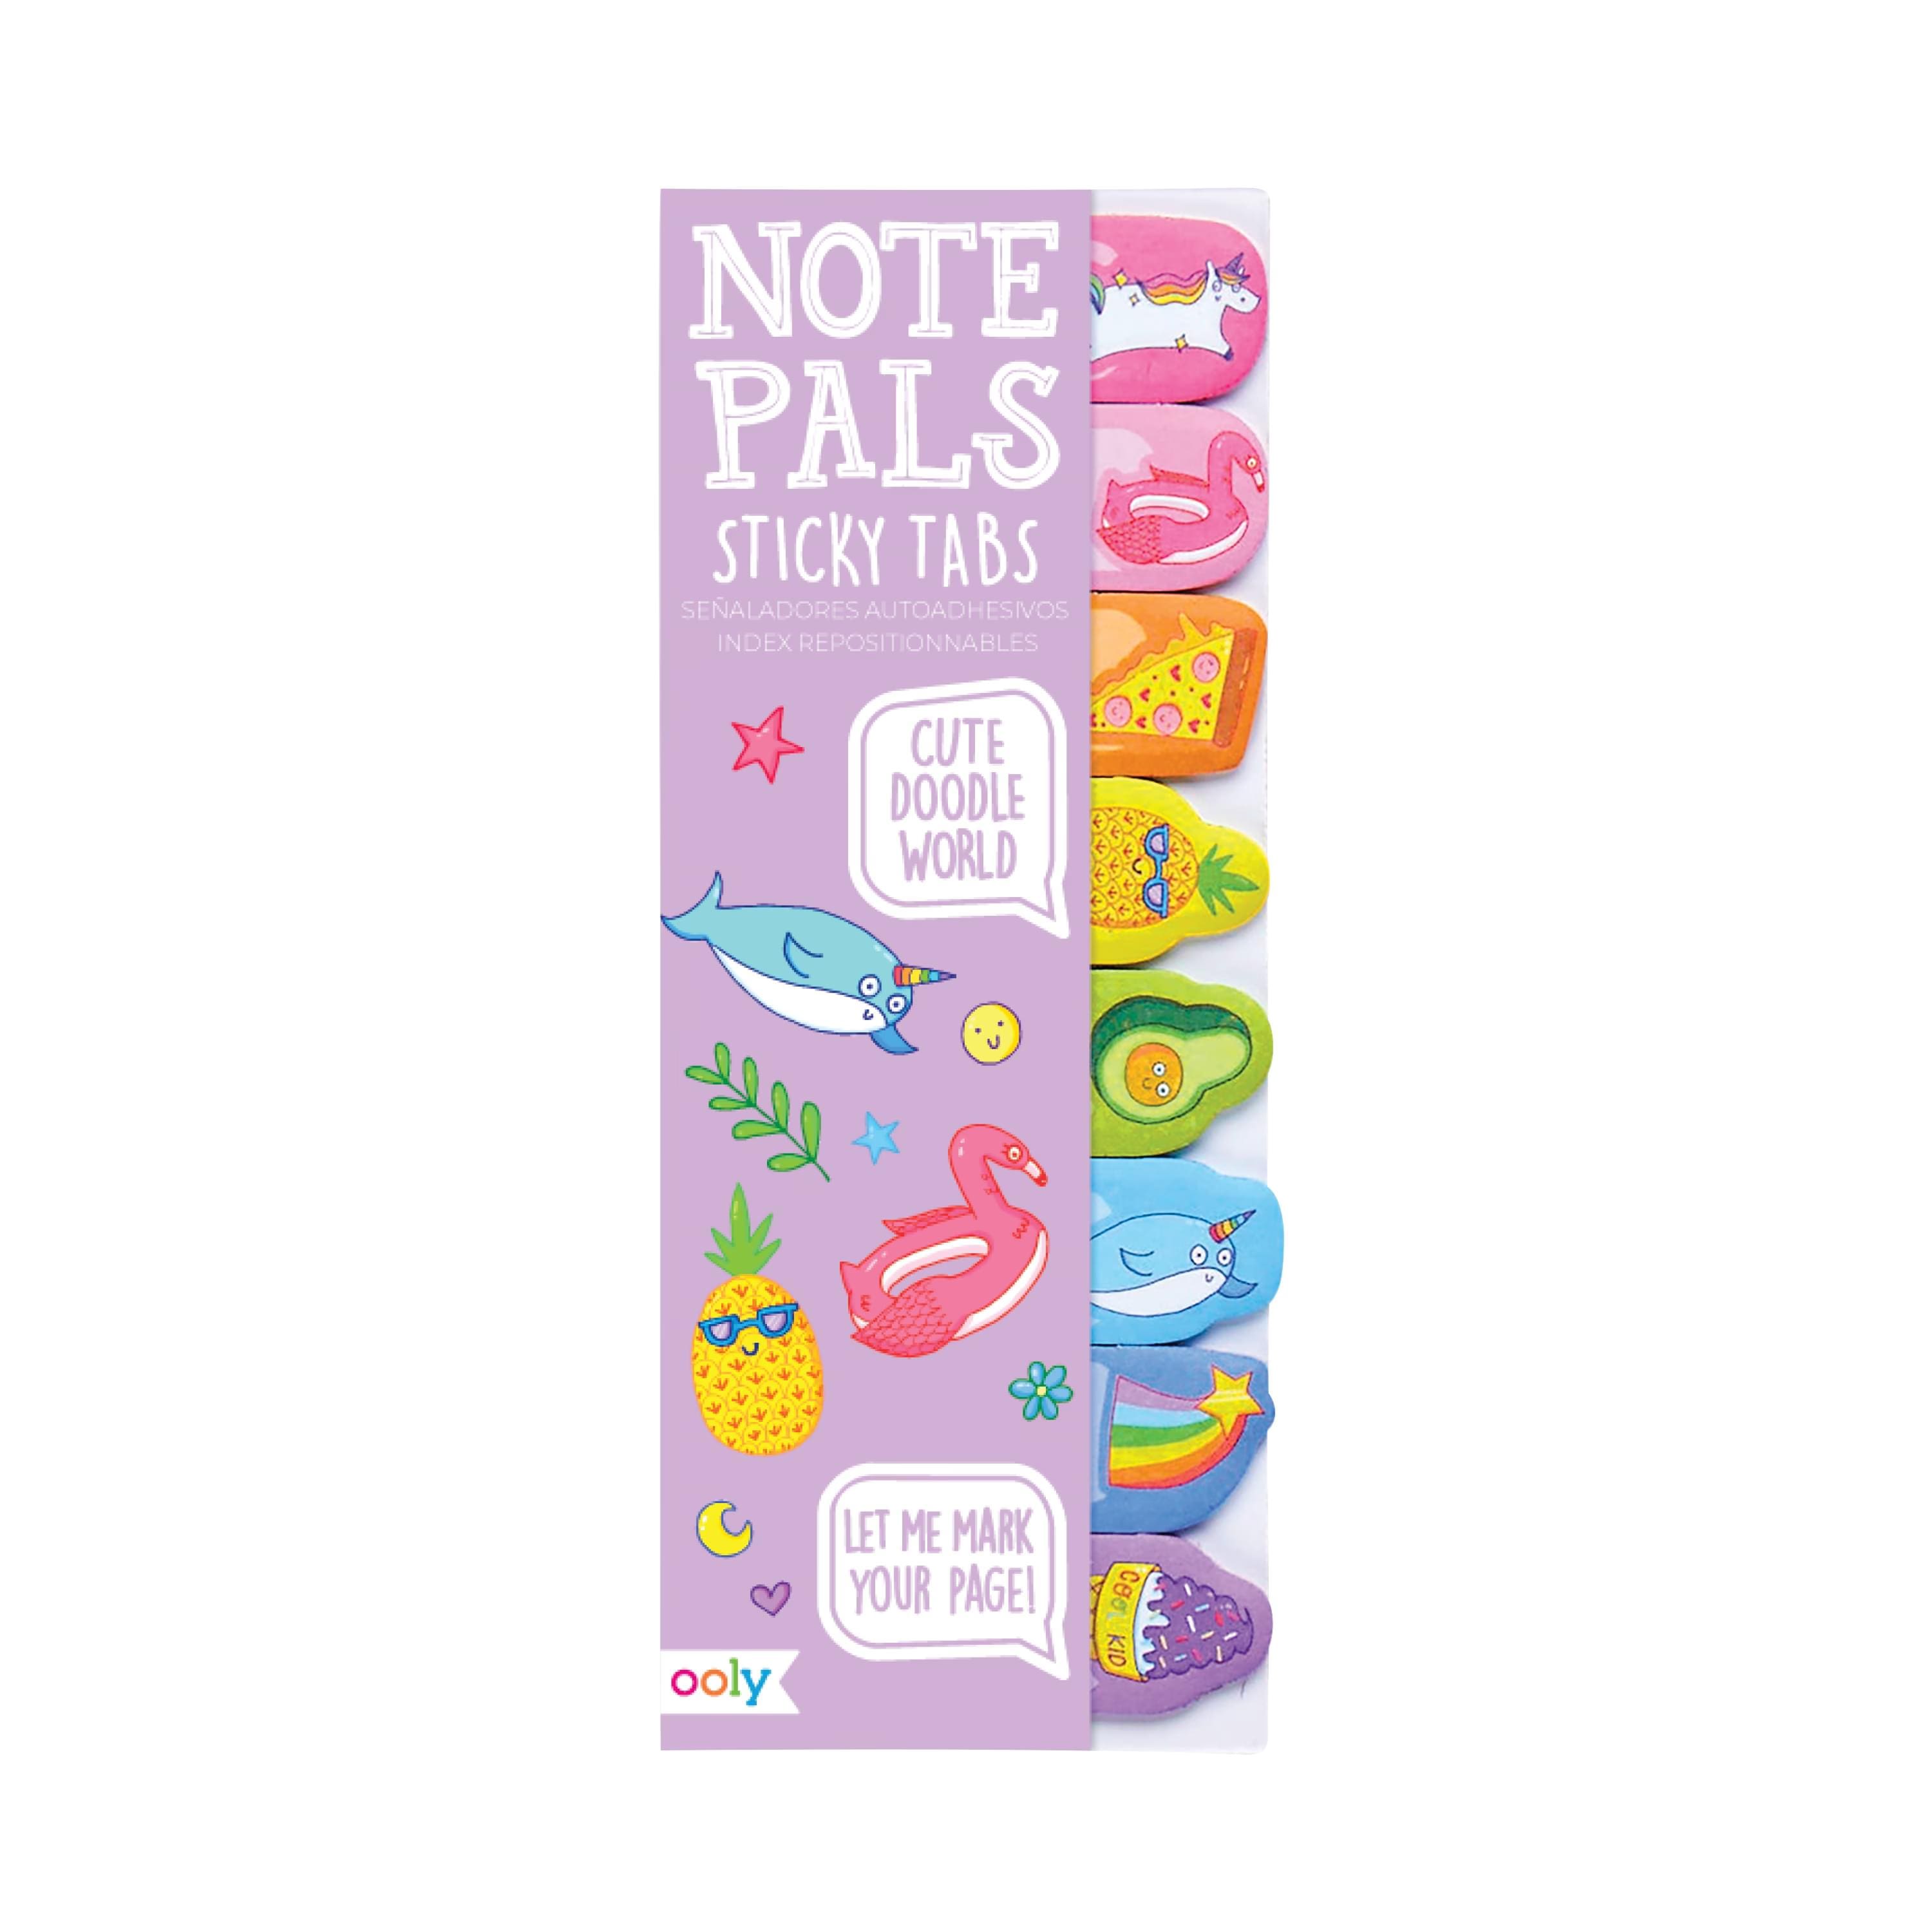 OOLY Note Pals Cute Doodle World Sticky Tabs